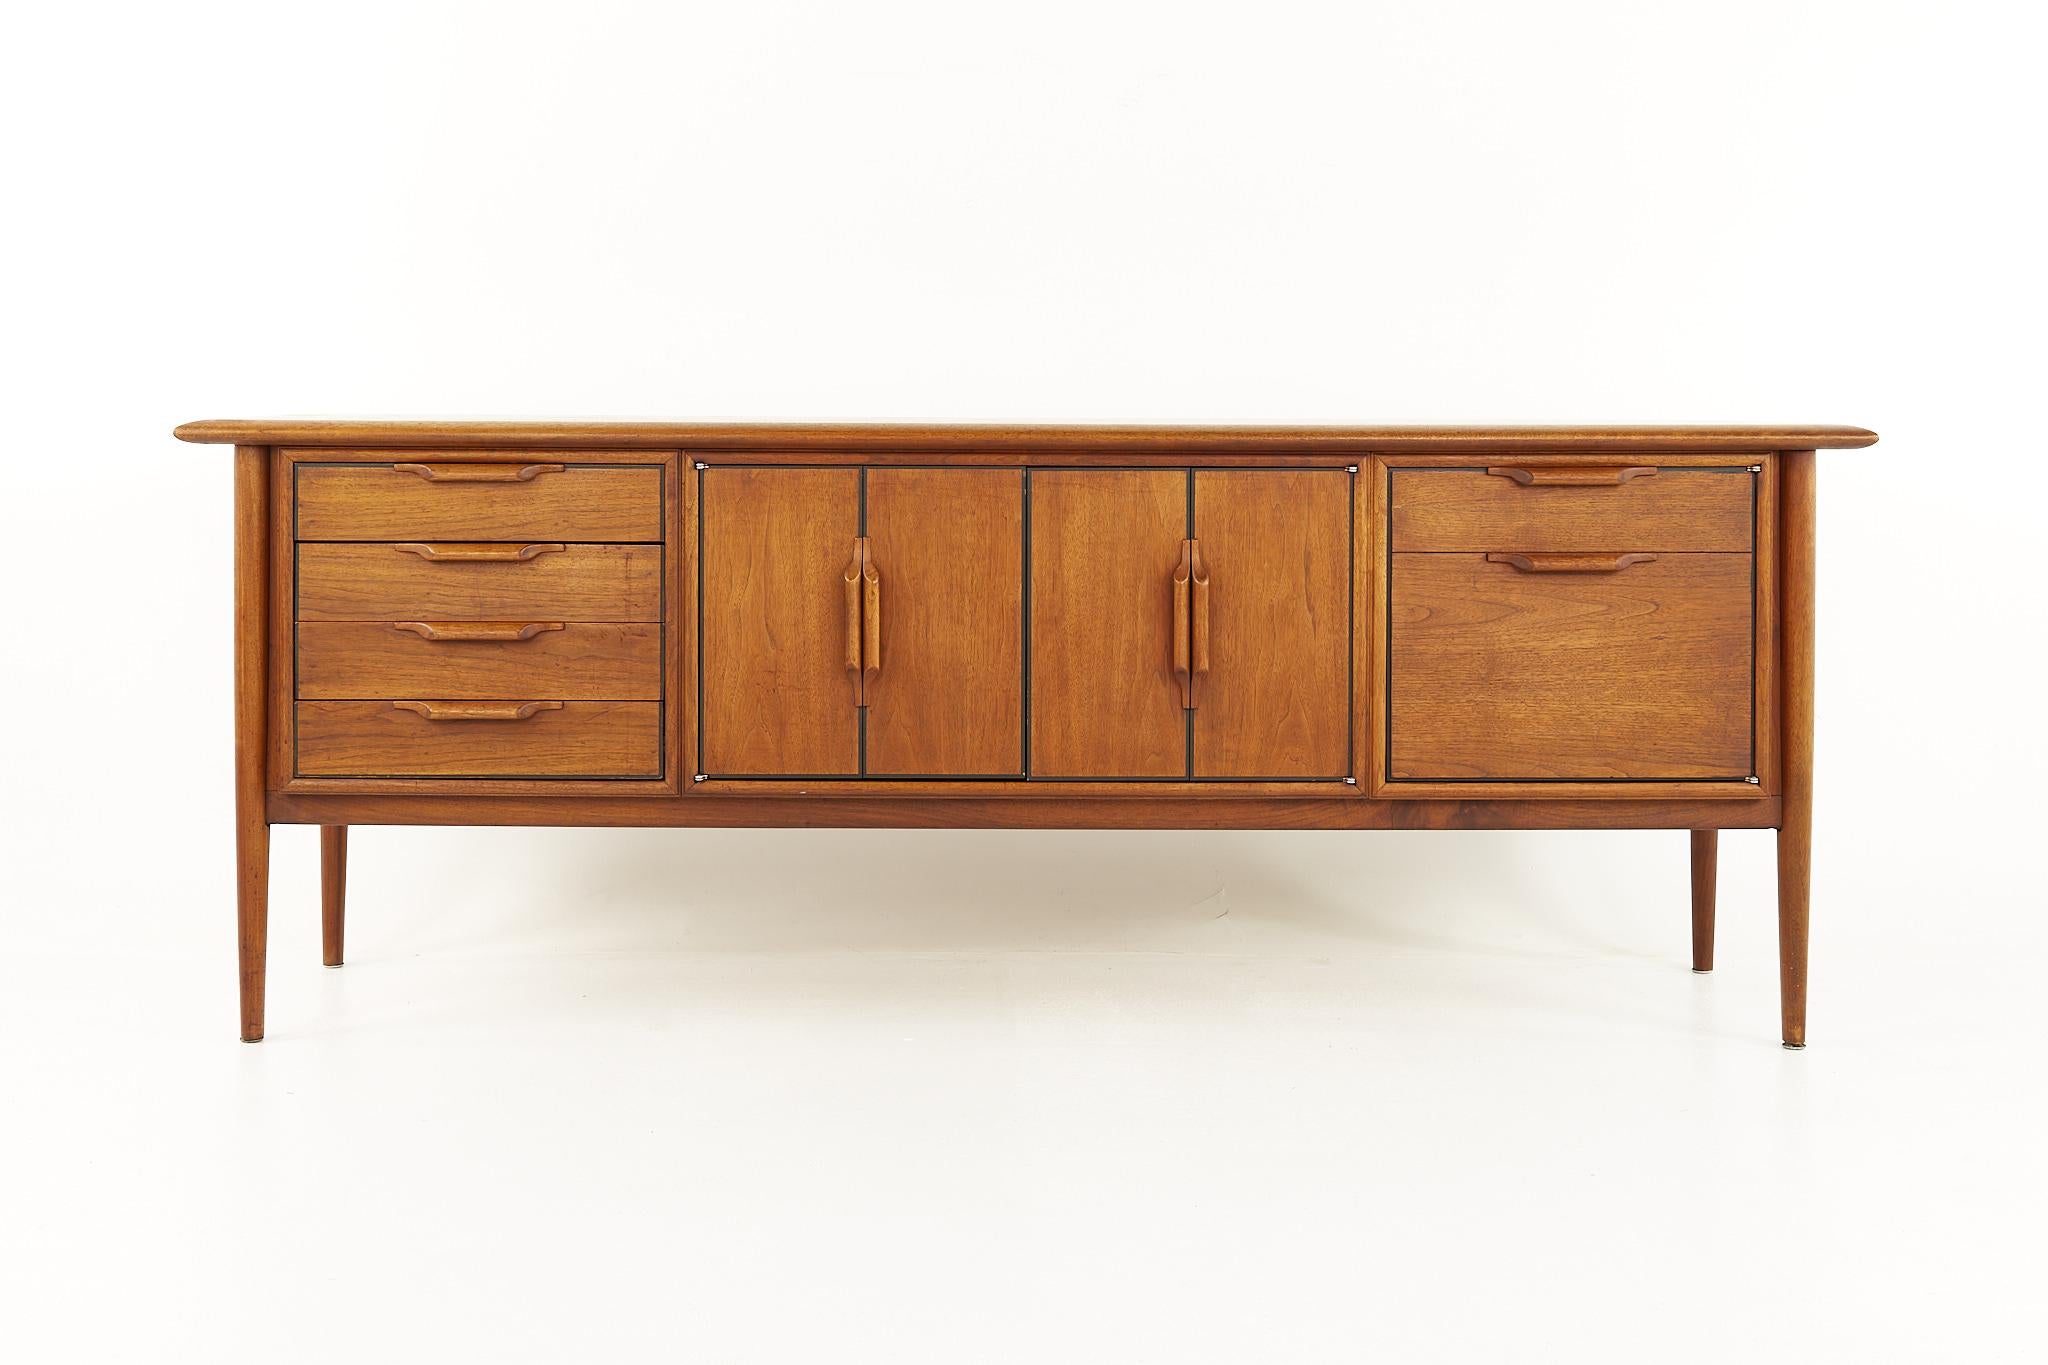 Alma Castilian Line Mid Century Walnut Credenza

This credenza measures: 77 wide x 21 deep x 28.5 inches high

All pieces of furniture can be had in what we call restored vintage condition. That means the piece is restored upon purchase so it’s free